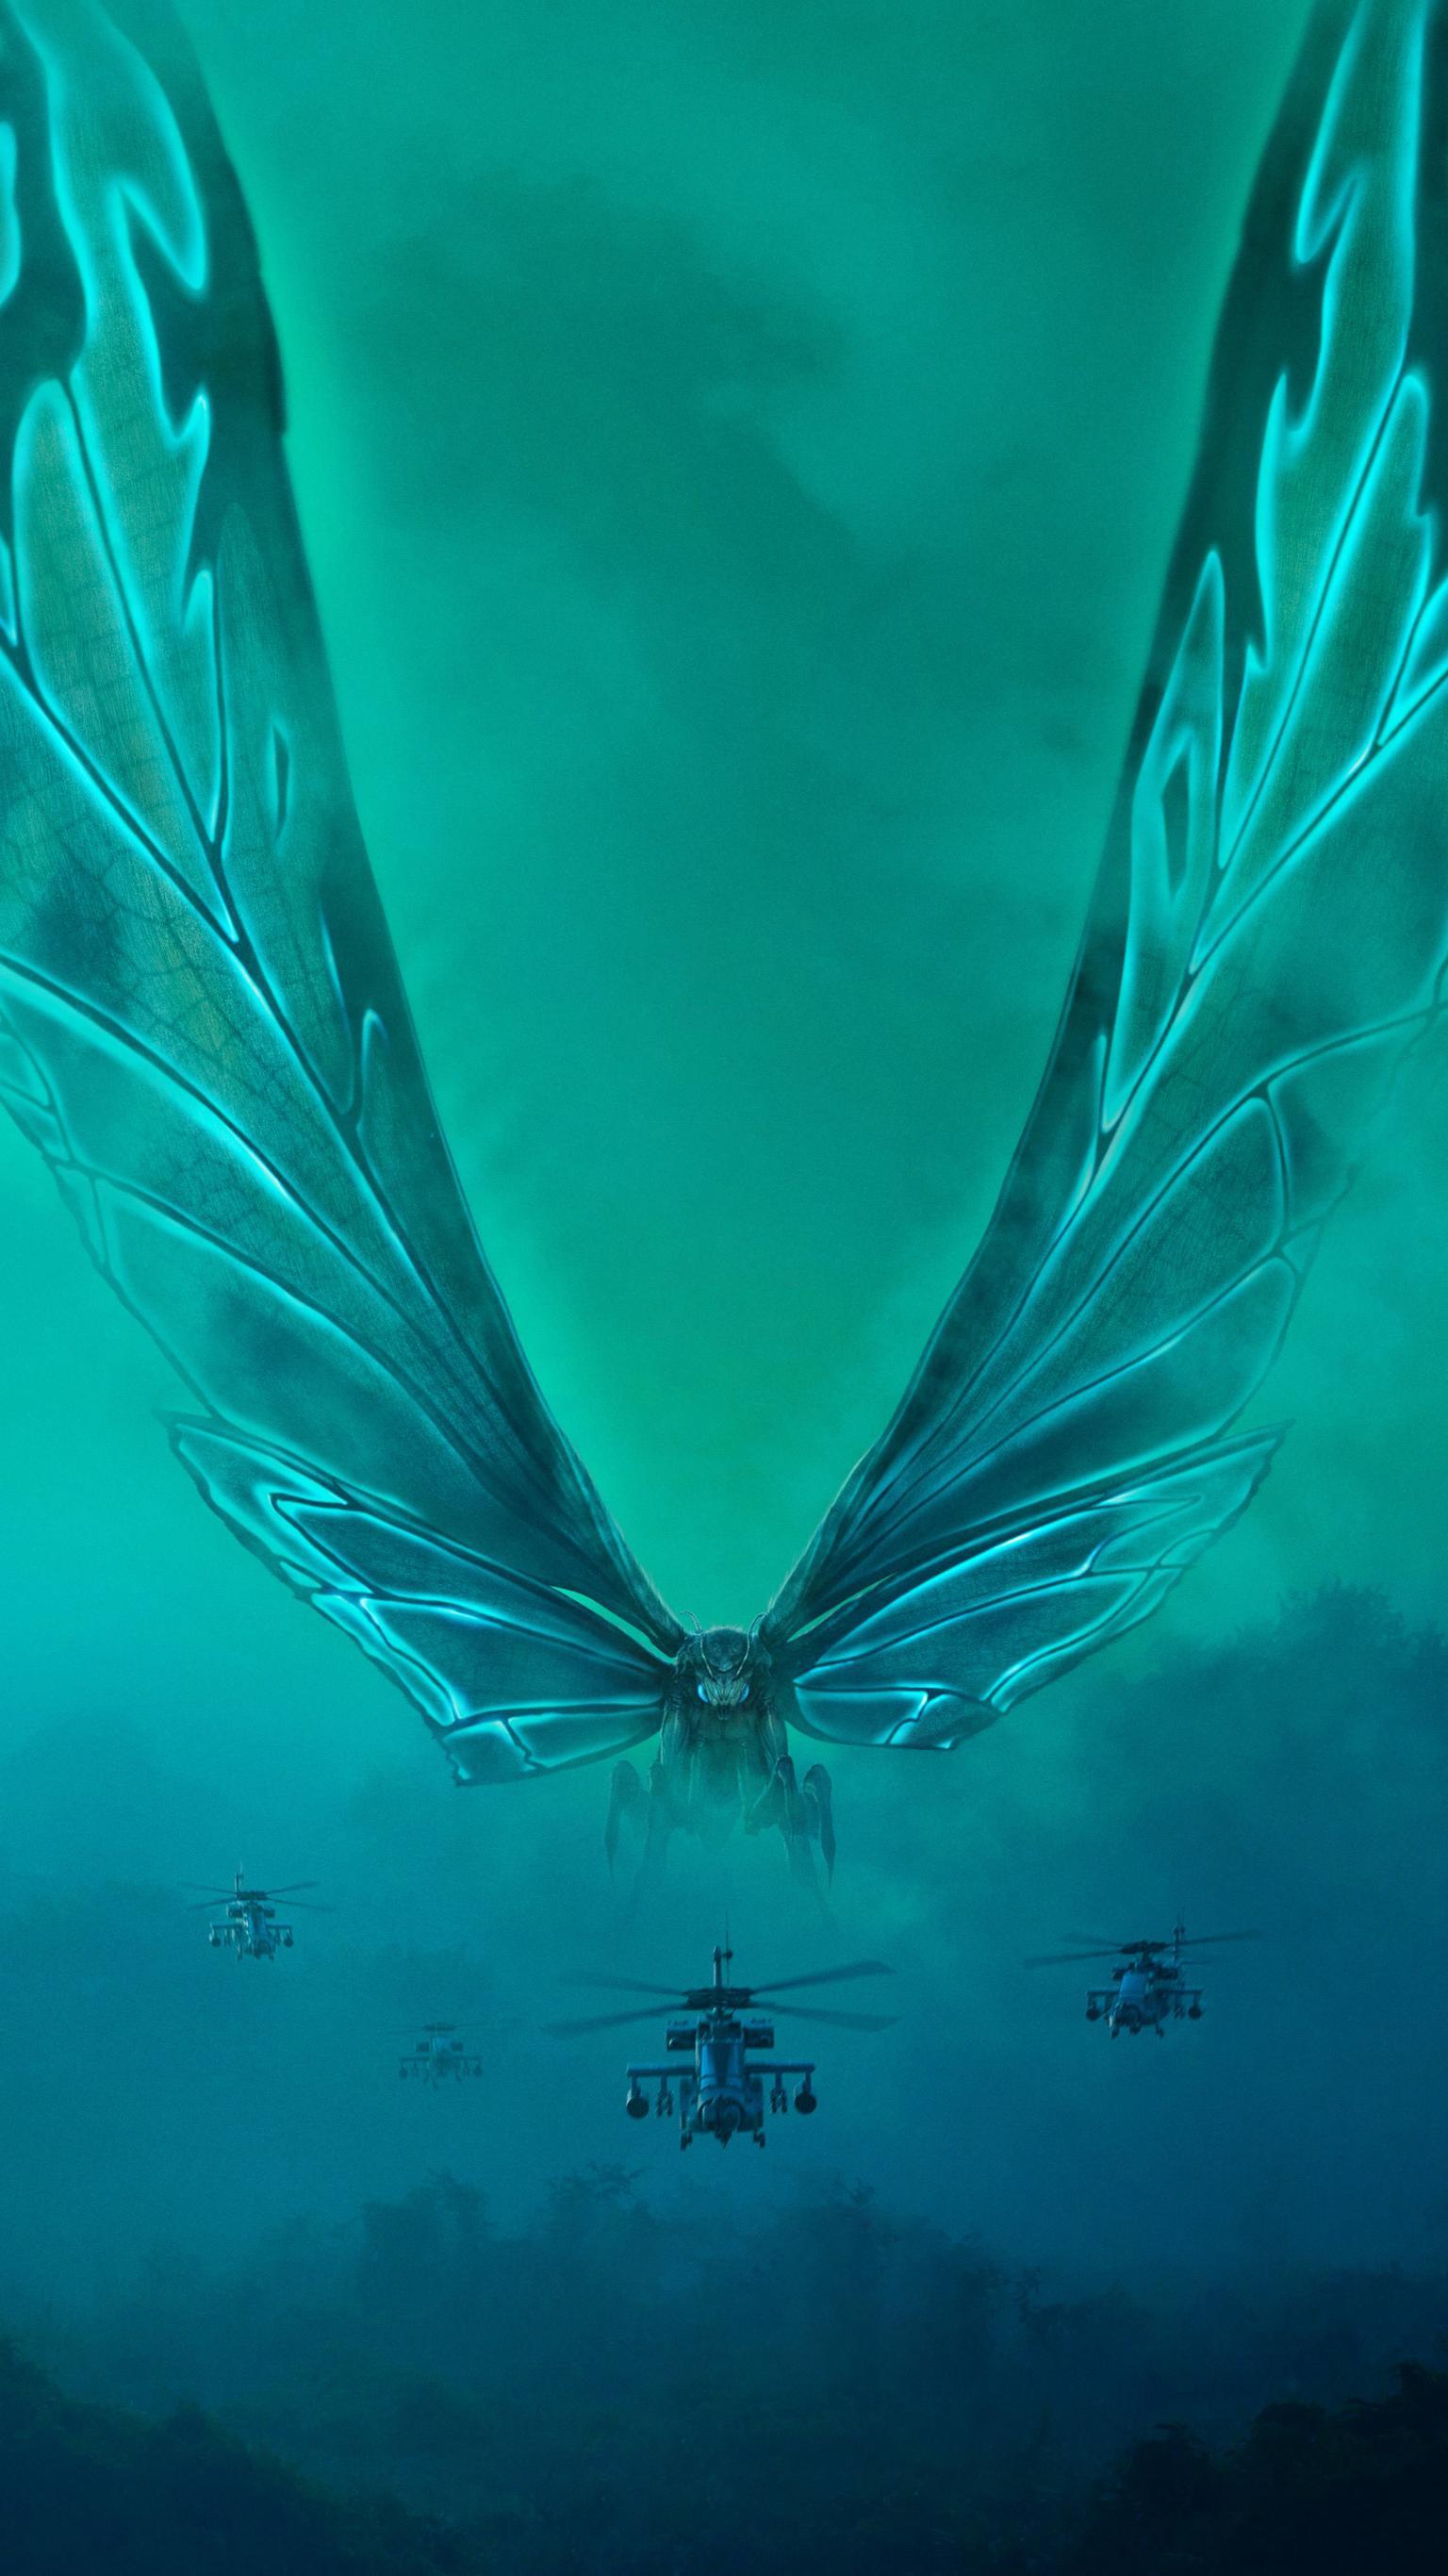 Godzilla King Of The Monsters 2019 Phone Wallpaper In 2019